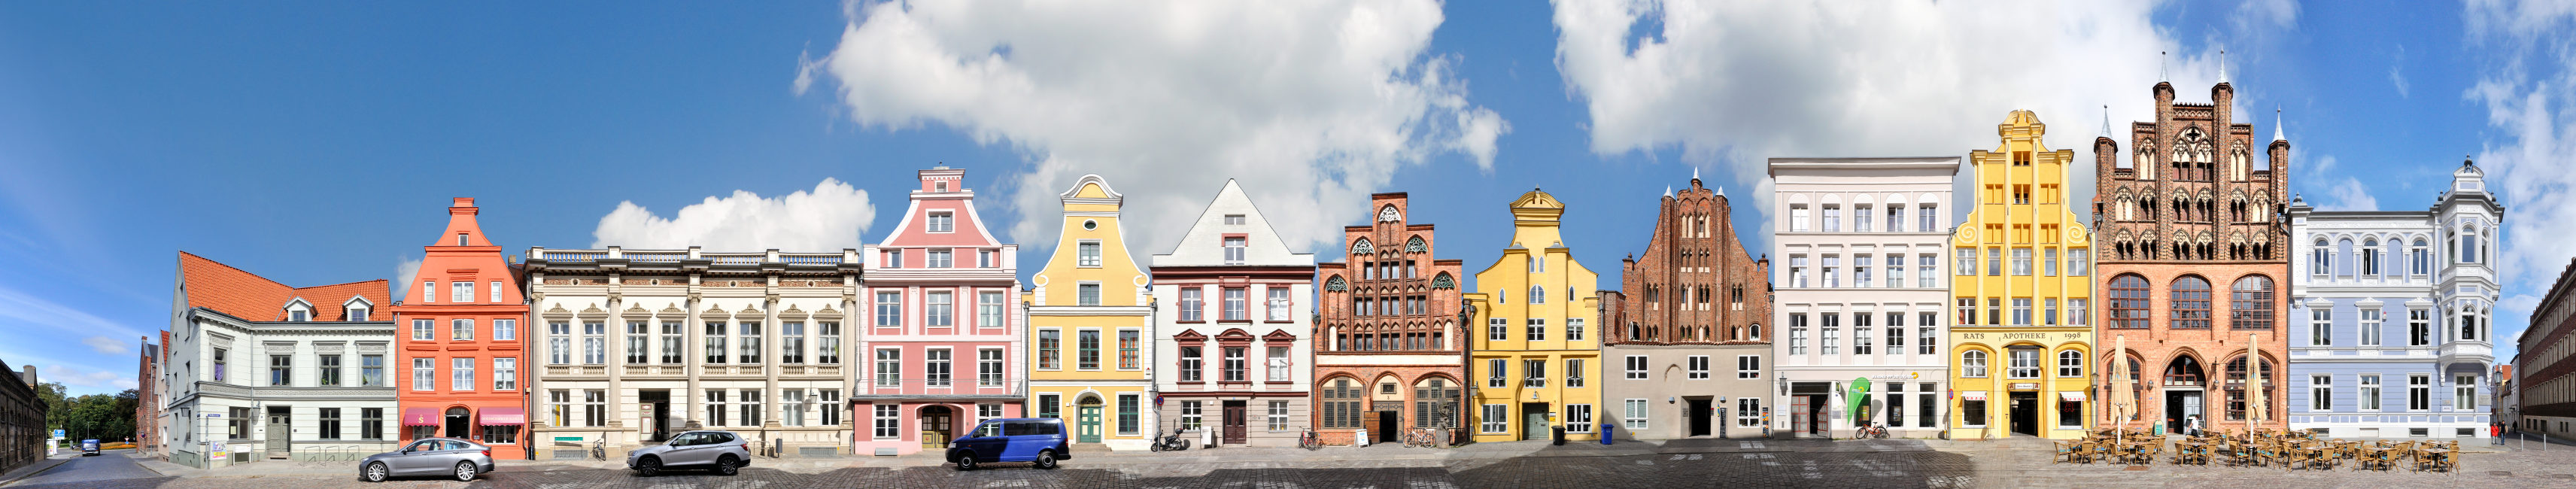 UNESCO Germany Stralsund at baltic sea street panorama of facades and architecture